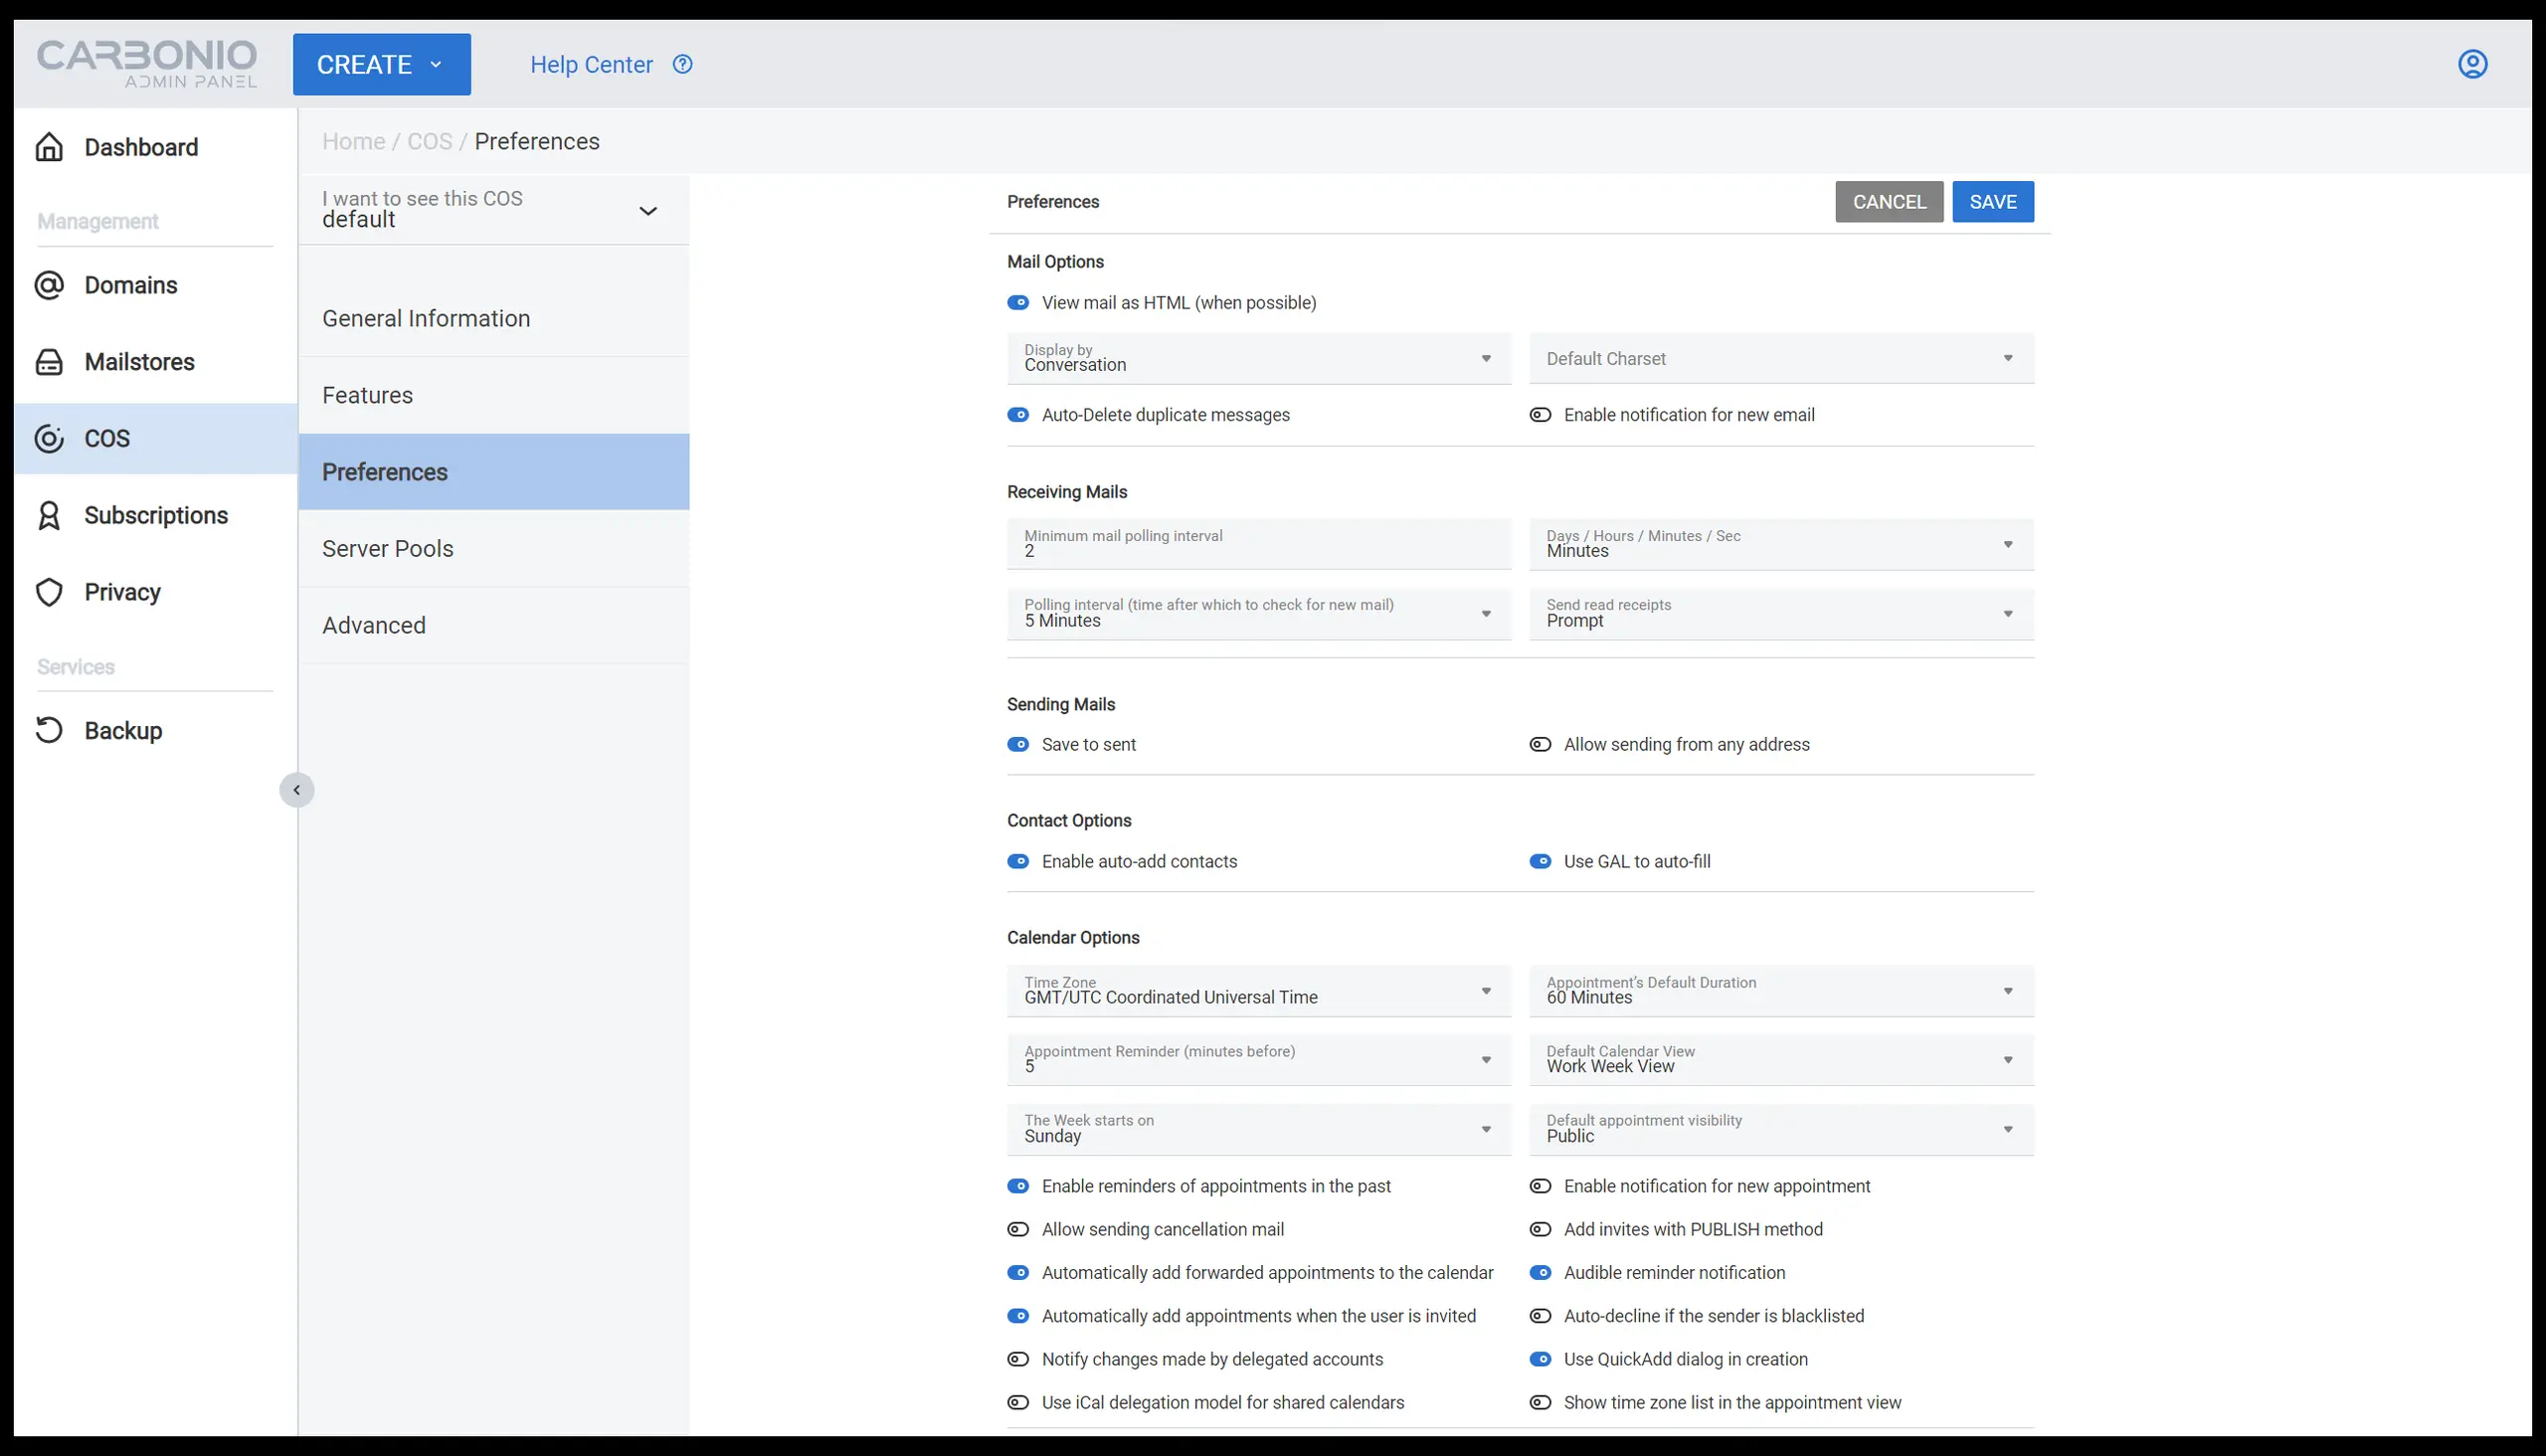 Image of the Carbonio admin panel classes of service preferences.